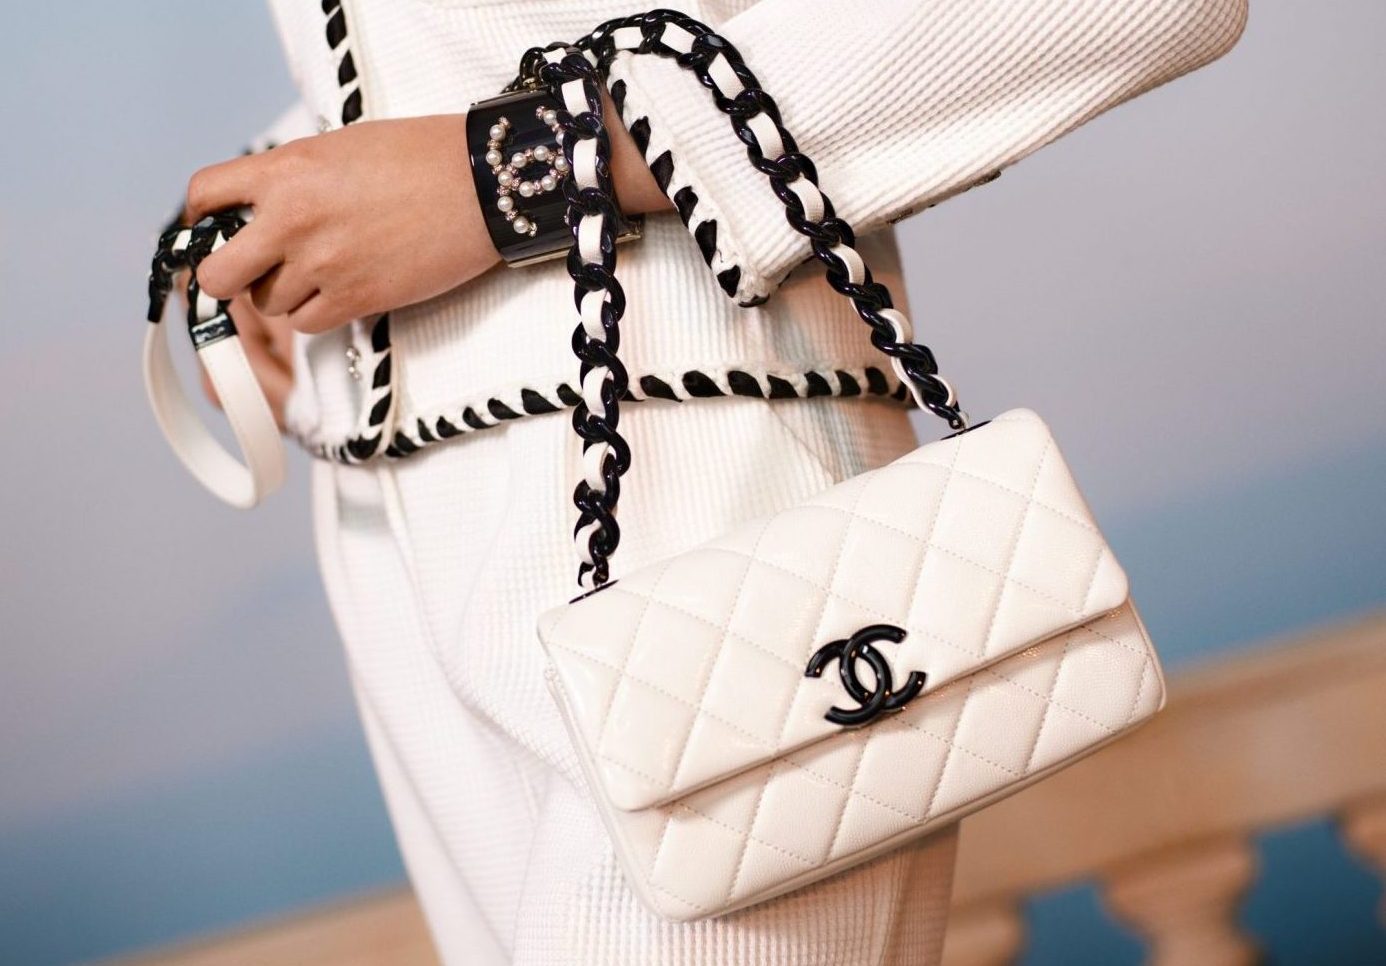 Chanel, for instance, has raised the prices on some its handbags by more th...